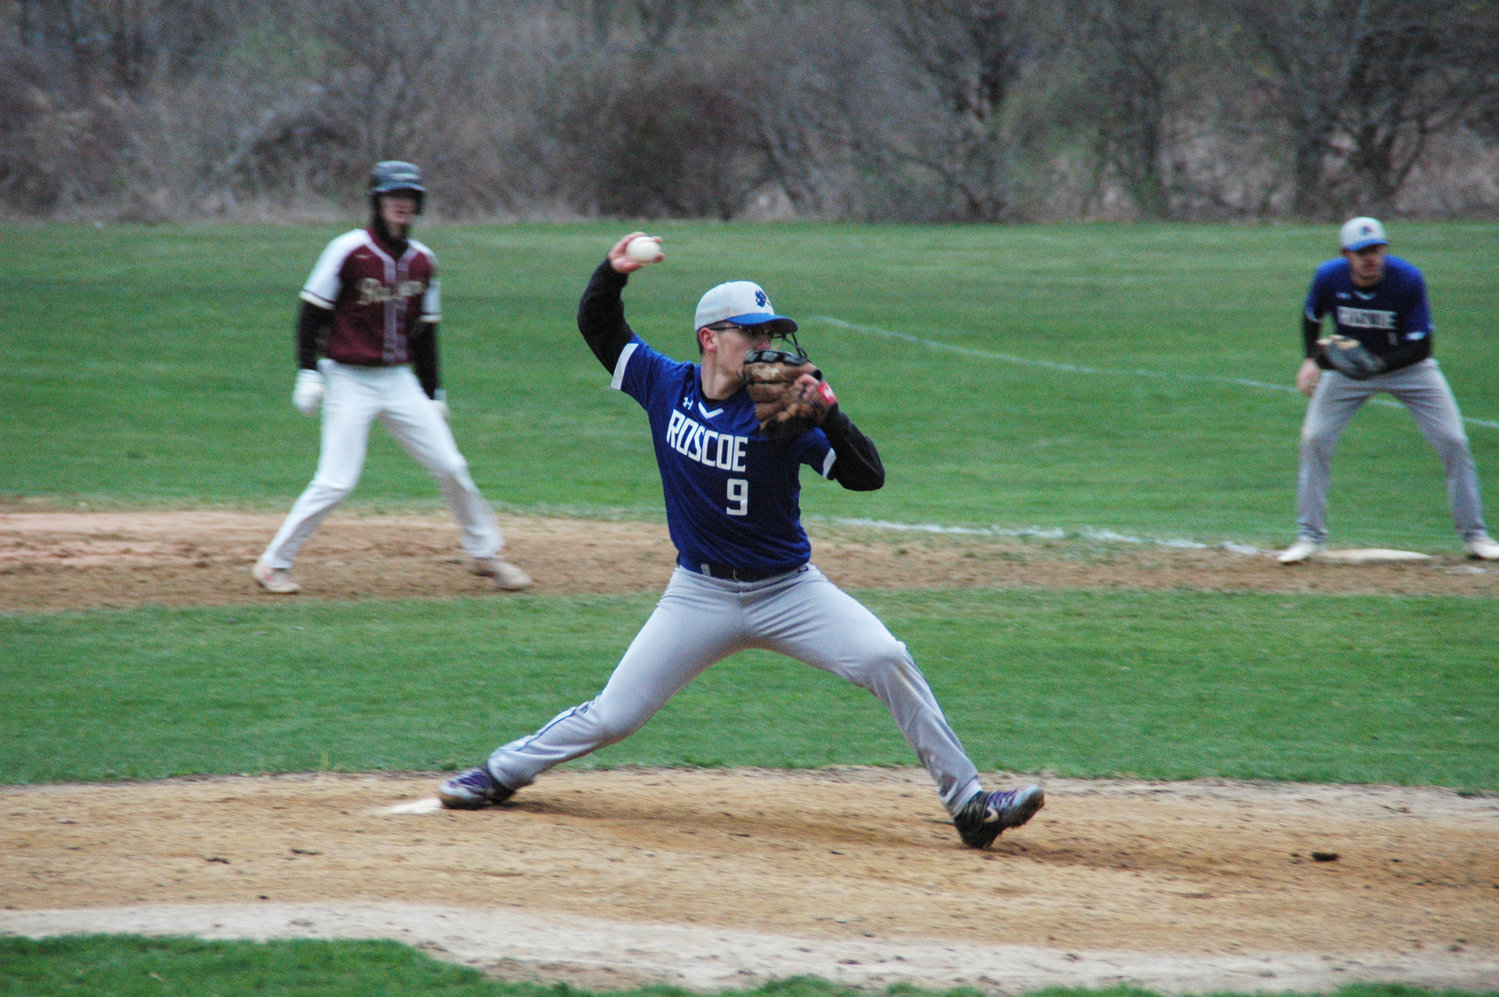 During a cold and windy home opener against O’Neill, Roscoe pitcher Paul Coman tried to bring the heat on the mound.